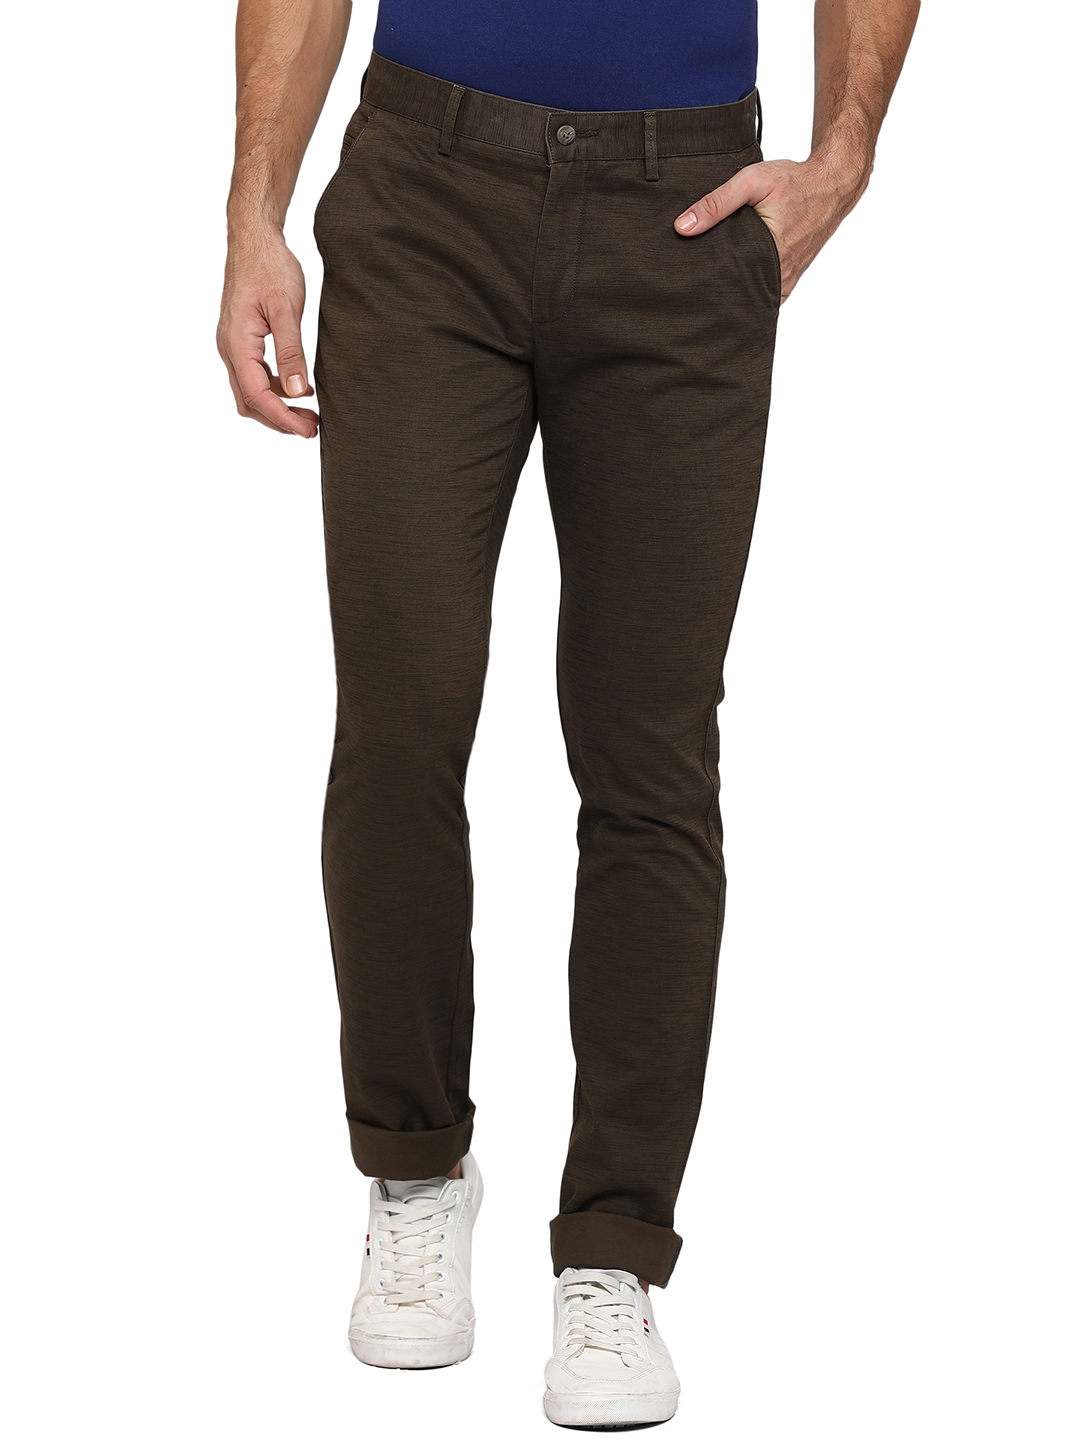 Greenfibre | Olive Brown Solid Super Slim Fit Casual Trouser | Greenfibre